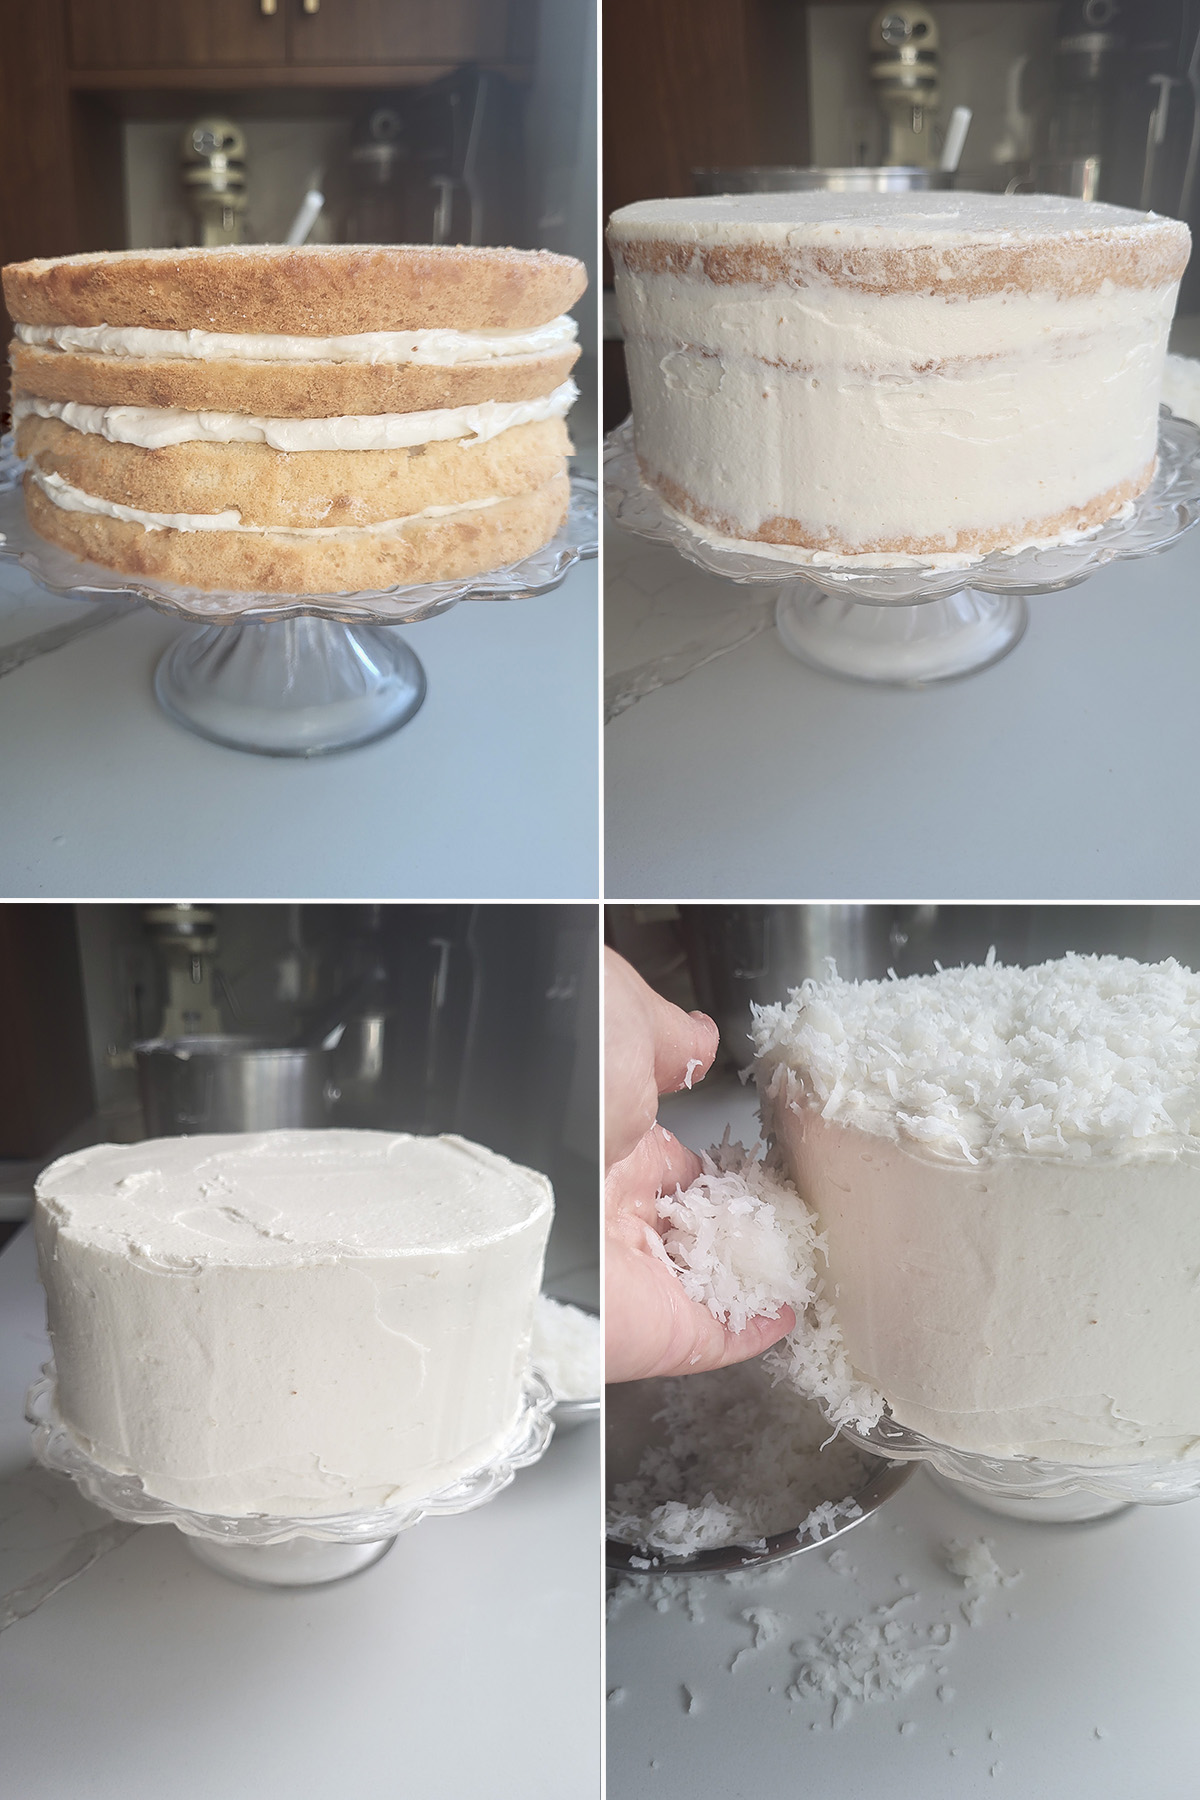 A stacked cake before and after frosting. A hand spreading coconut on a cake.